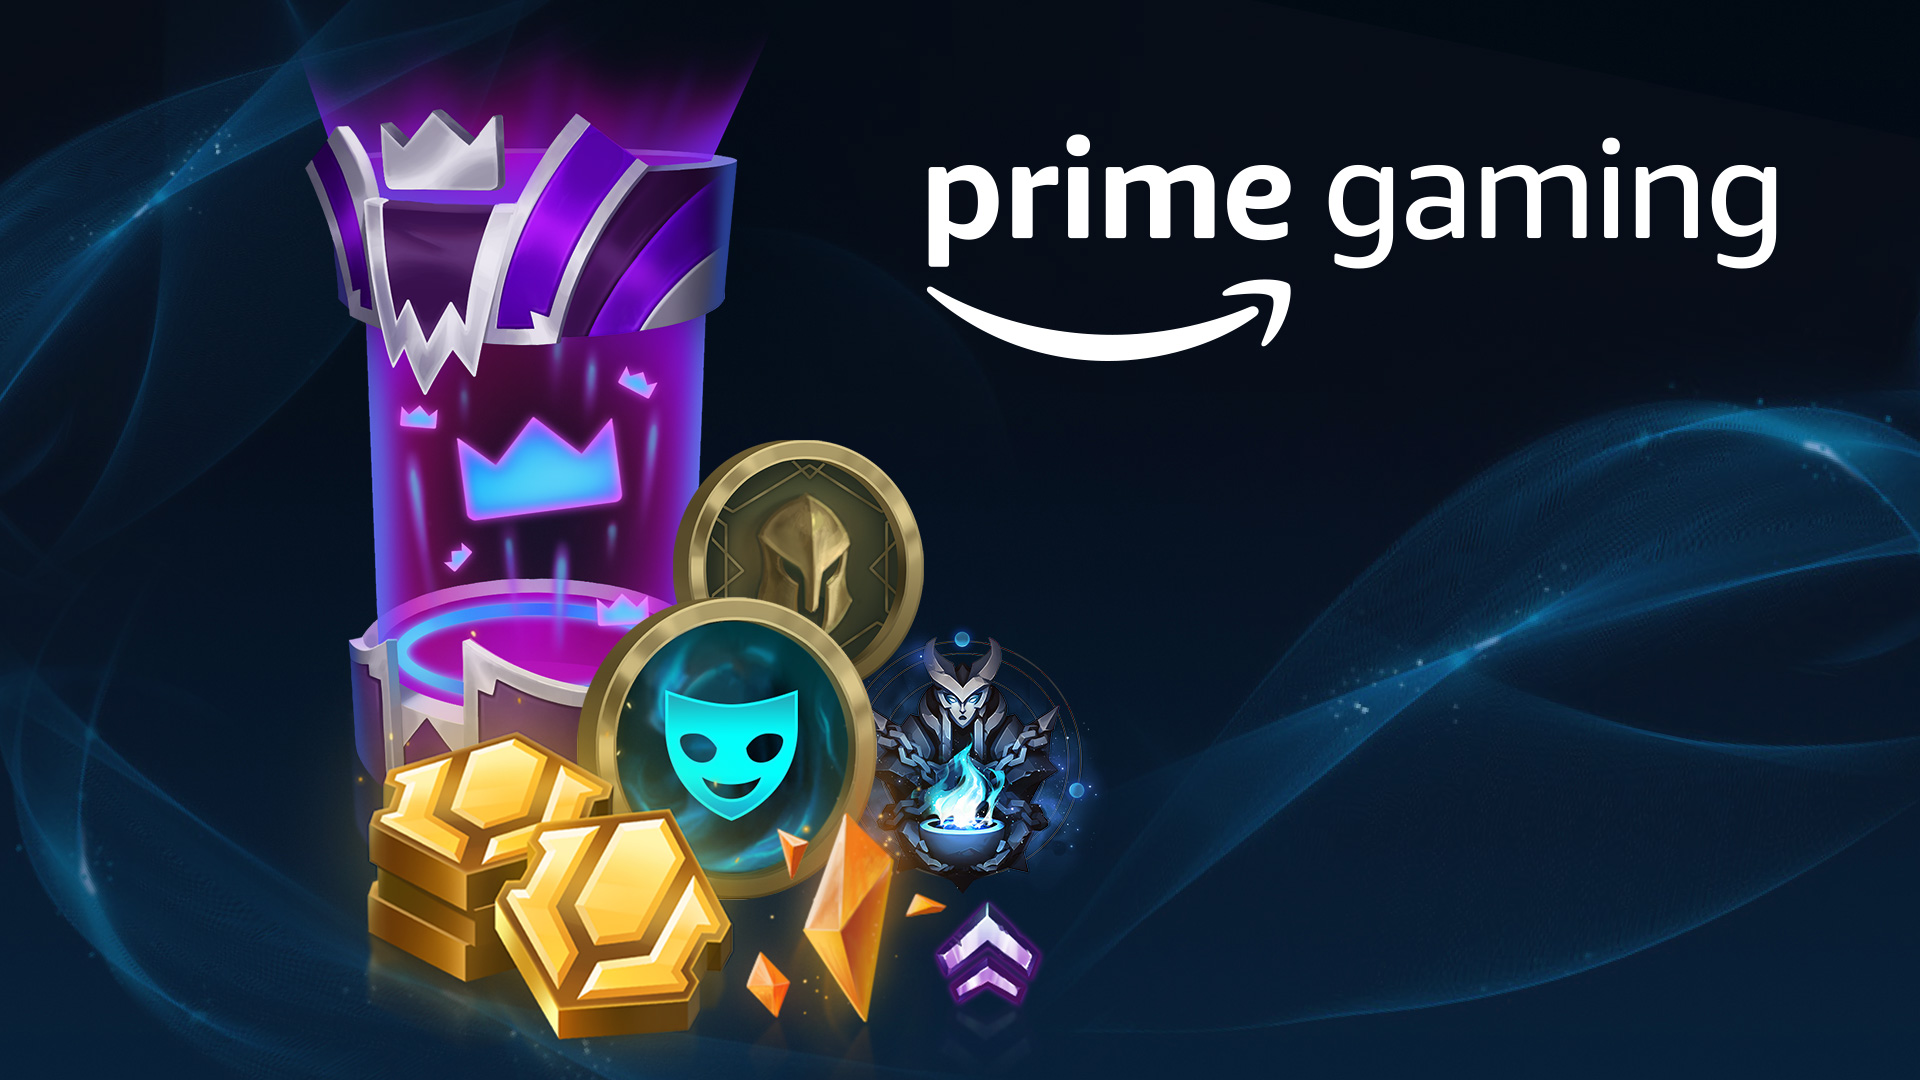 To claim the League of Legends Prime Gaming capsule each month, you need an active Amazon Prime subscription.